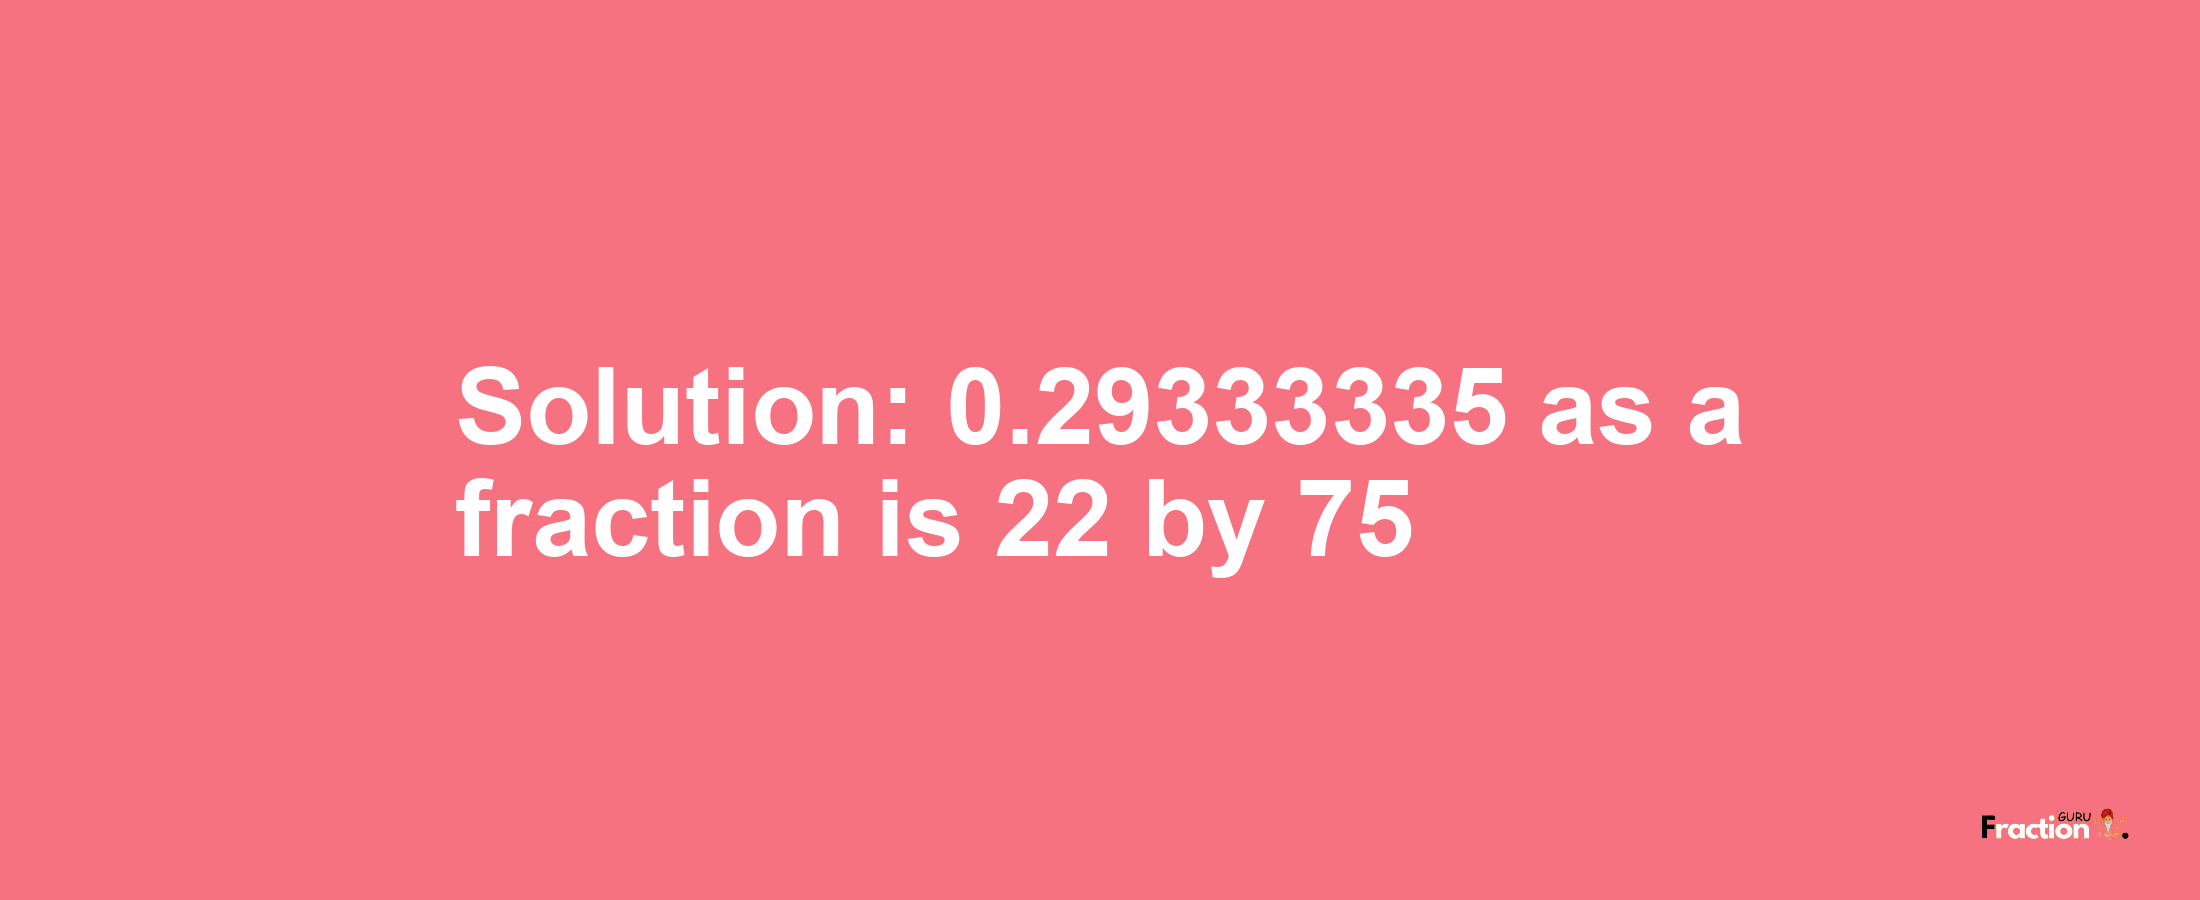 Solution:0.29333335 as a fraction is 22/75